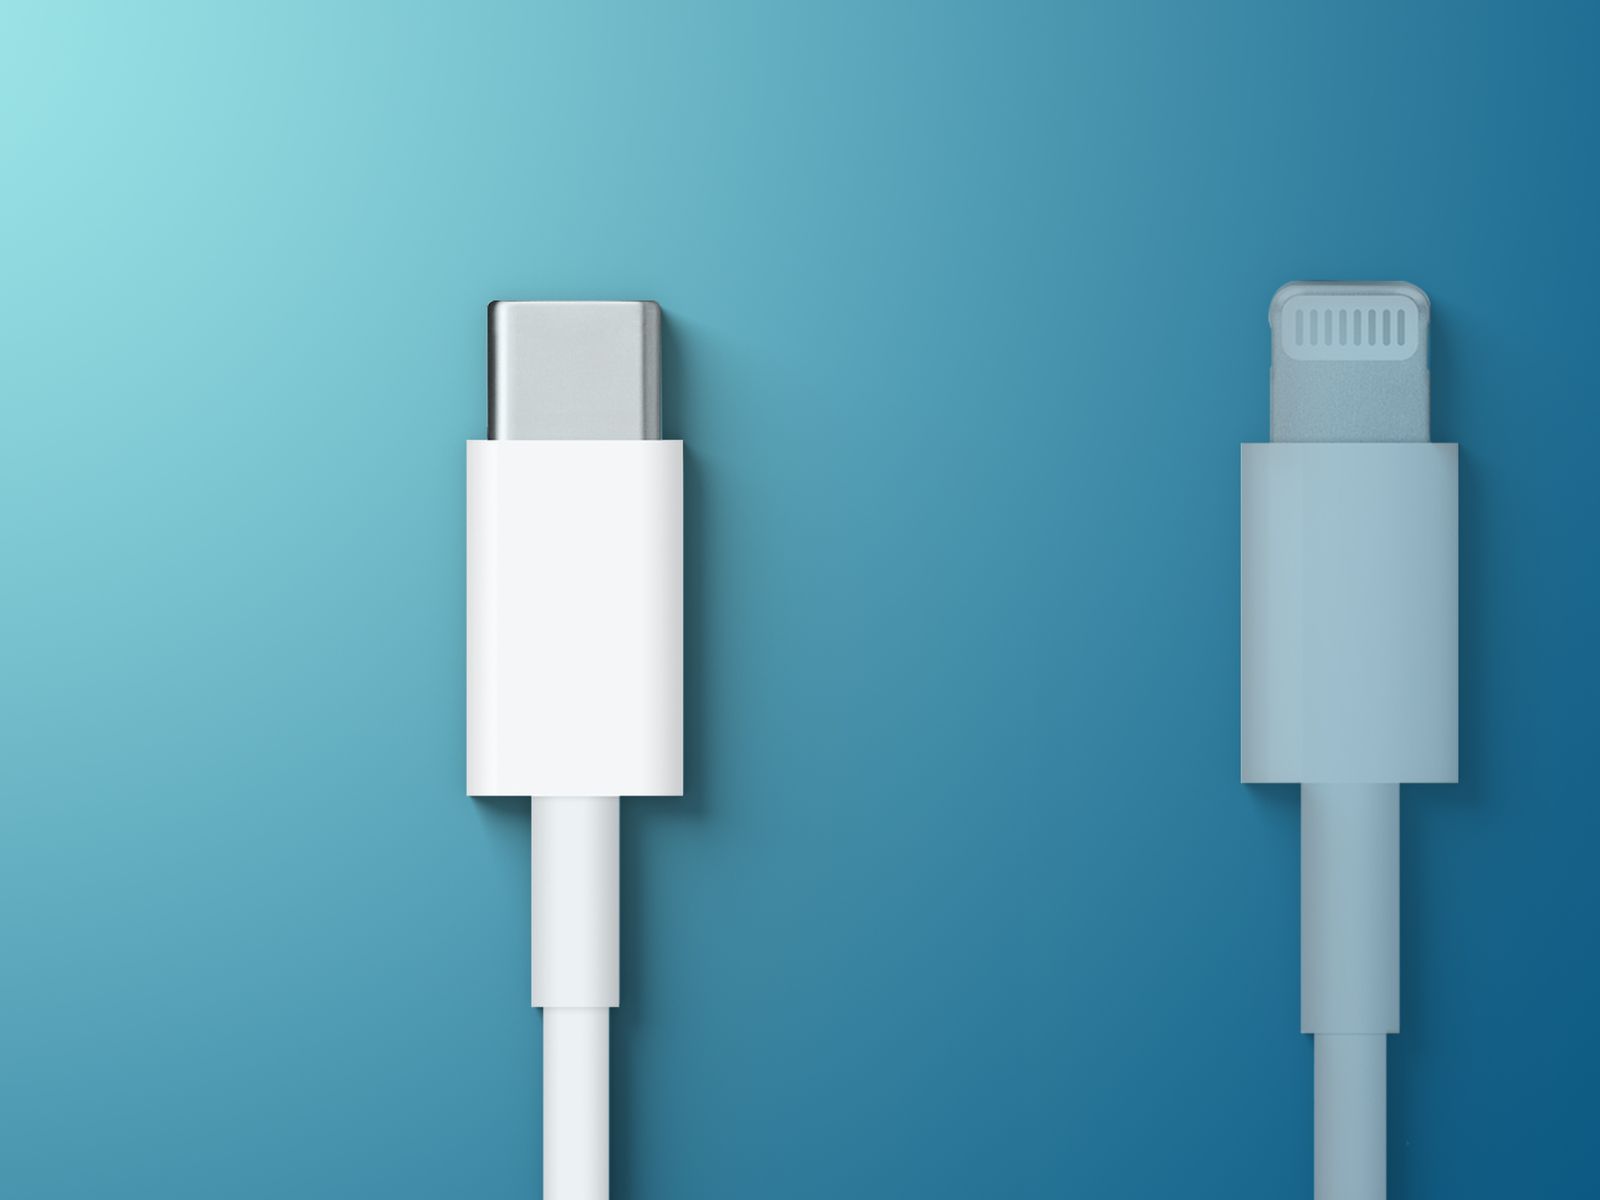 Apple Is Transitioning Fully to USB-C. Here's What It Means for Users.